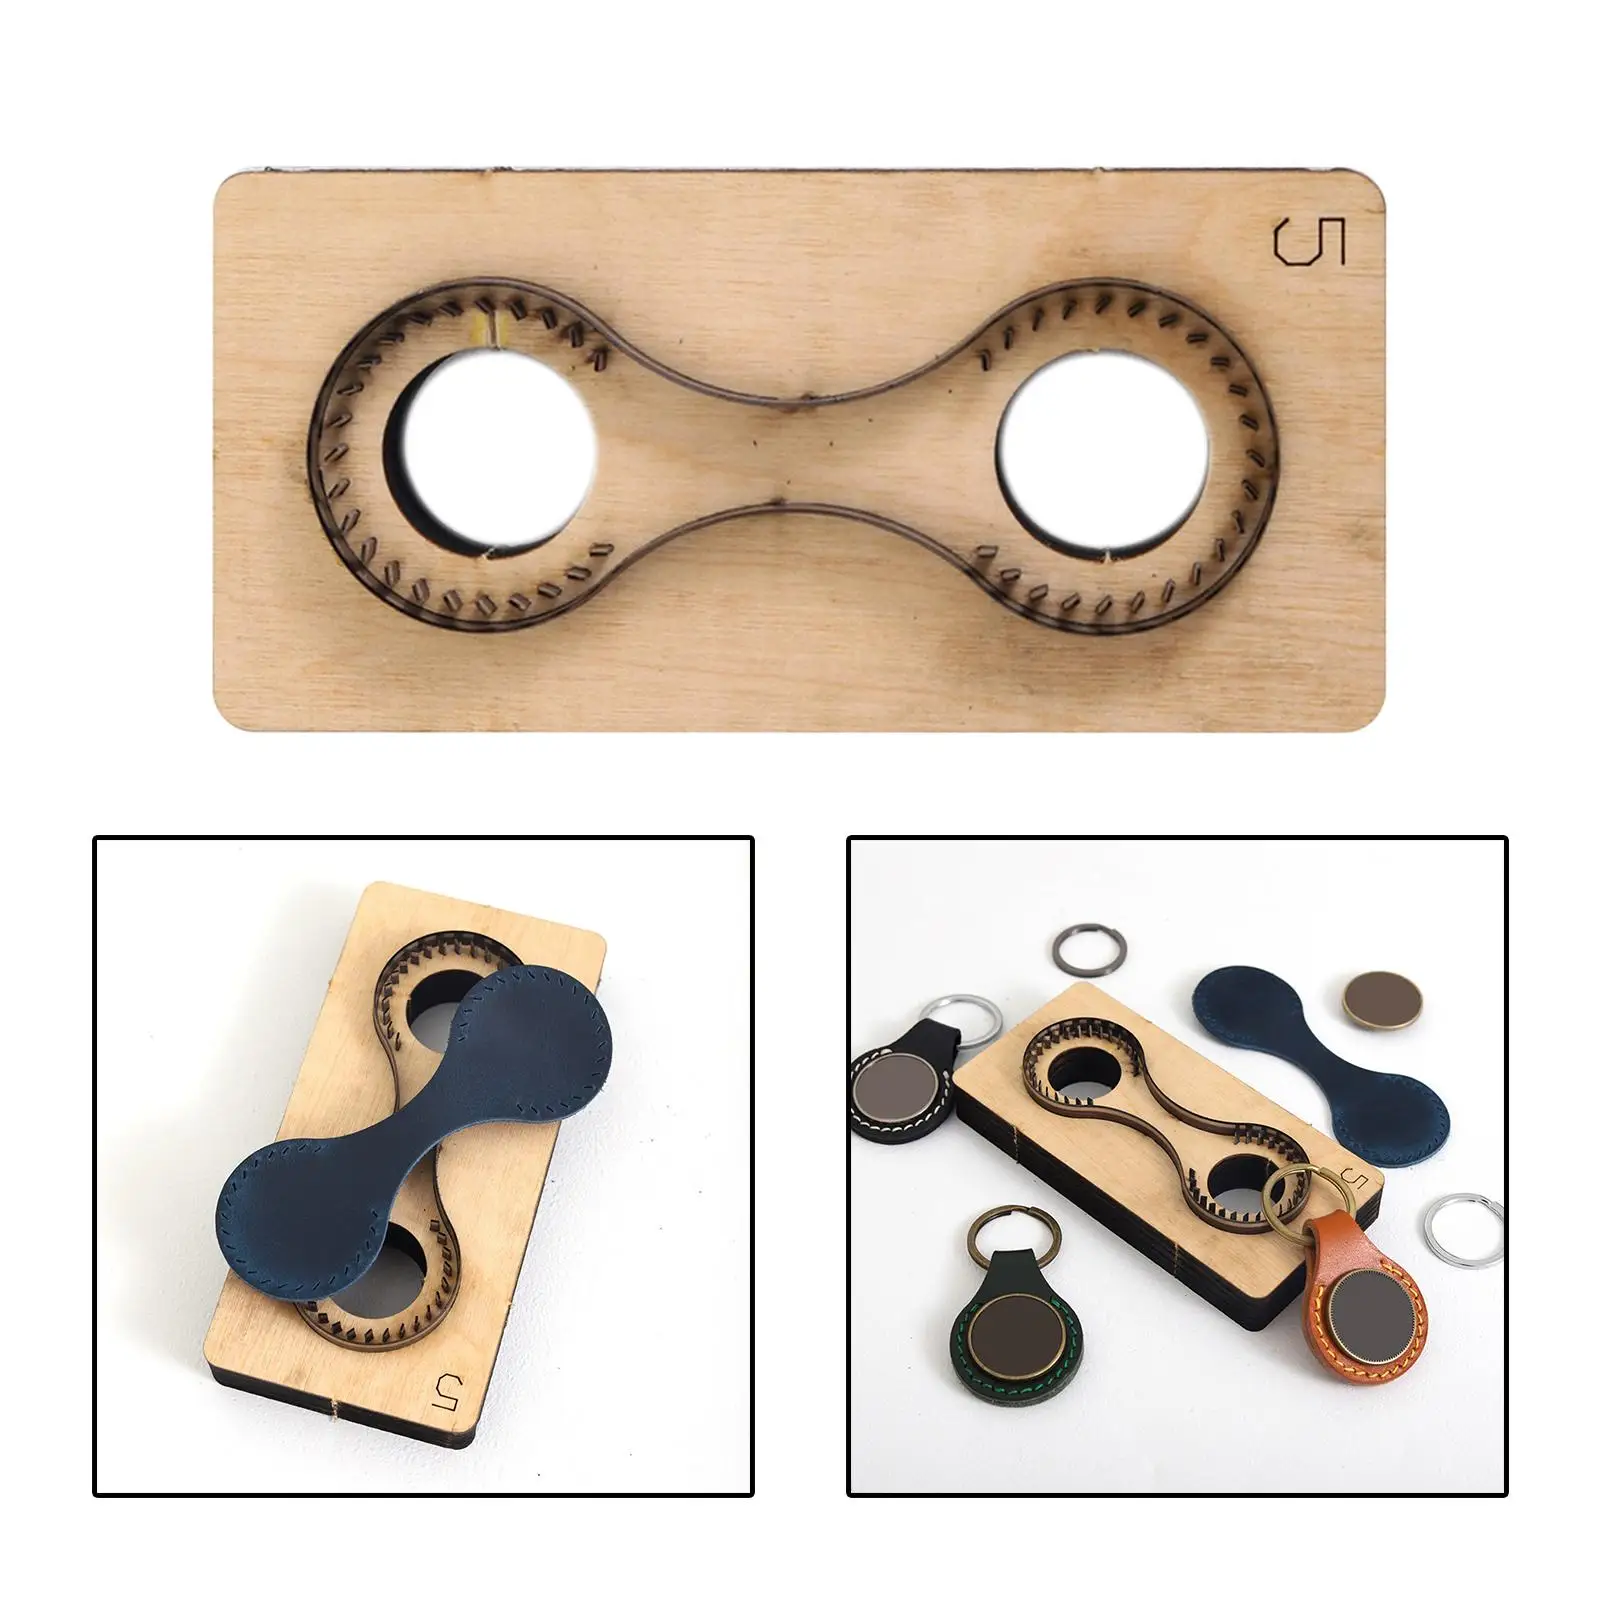 Metal Cutting Dies Key Ring 1 Piece Reusable Tool Kit Hand Punch Blade Craft Wooden Cutter for Leathercraft Die-Cutting Machine